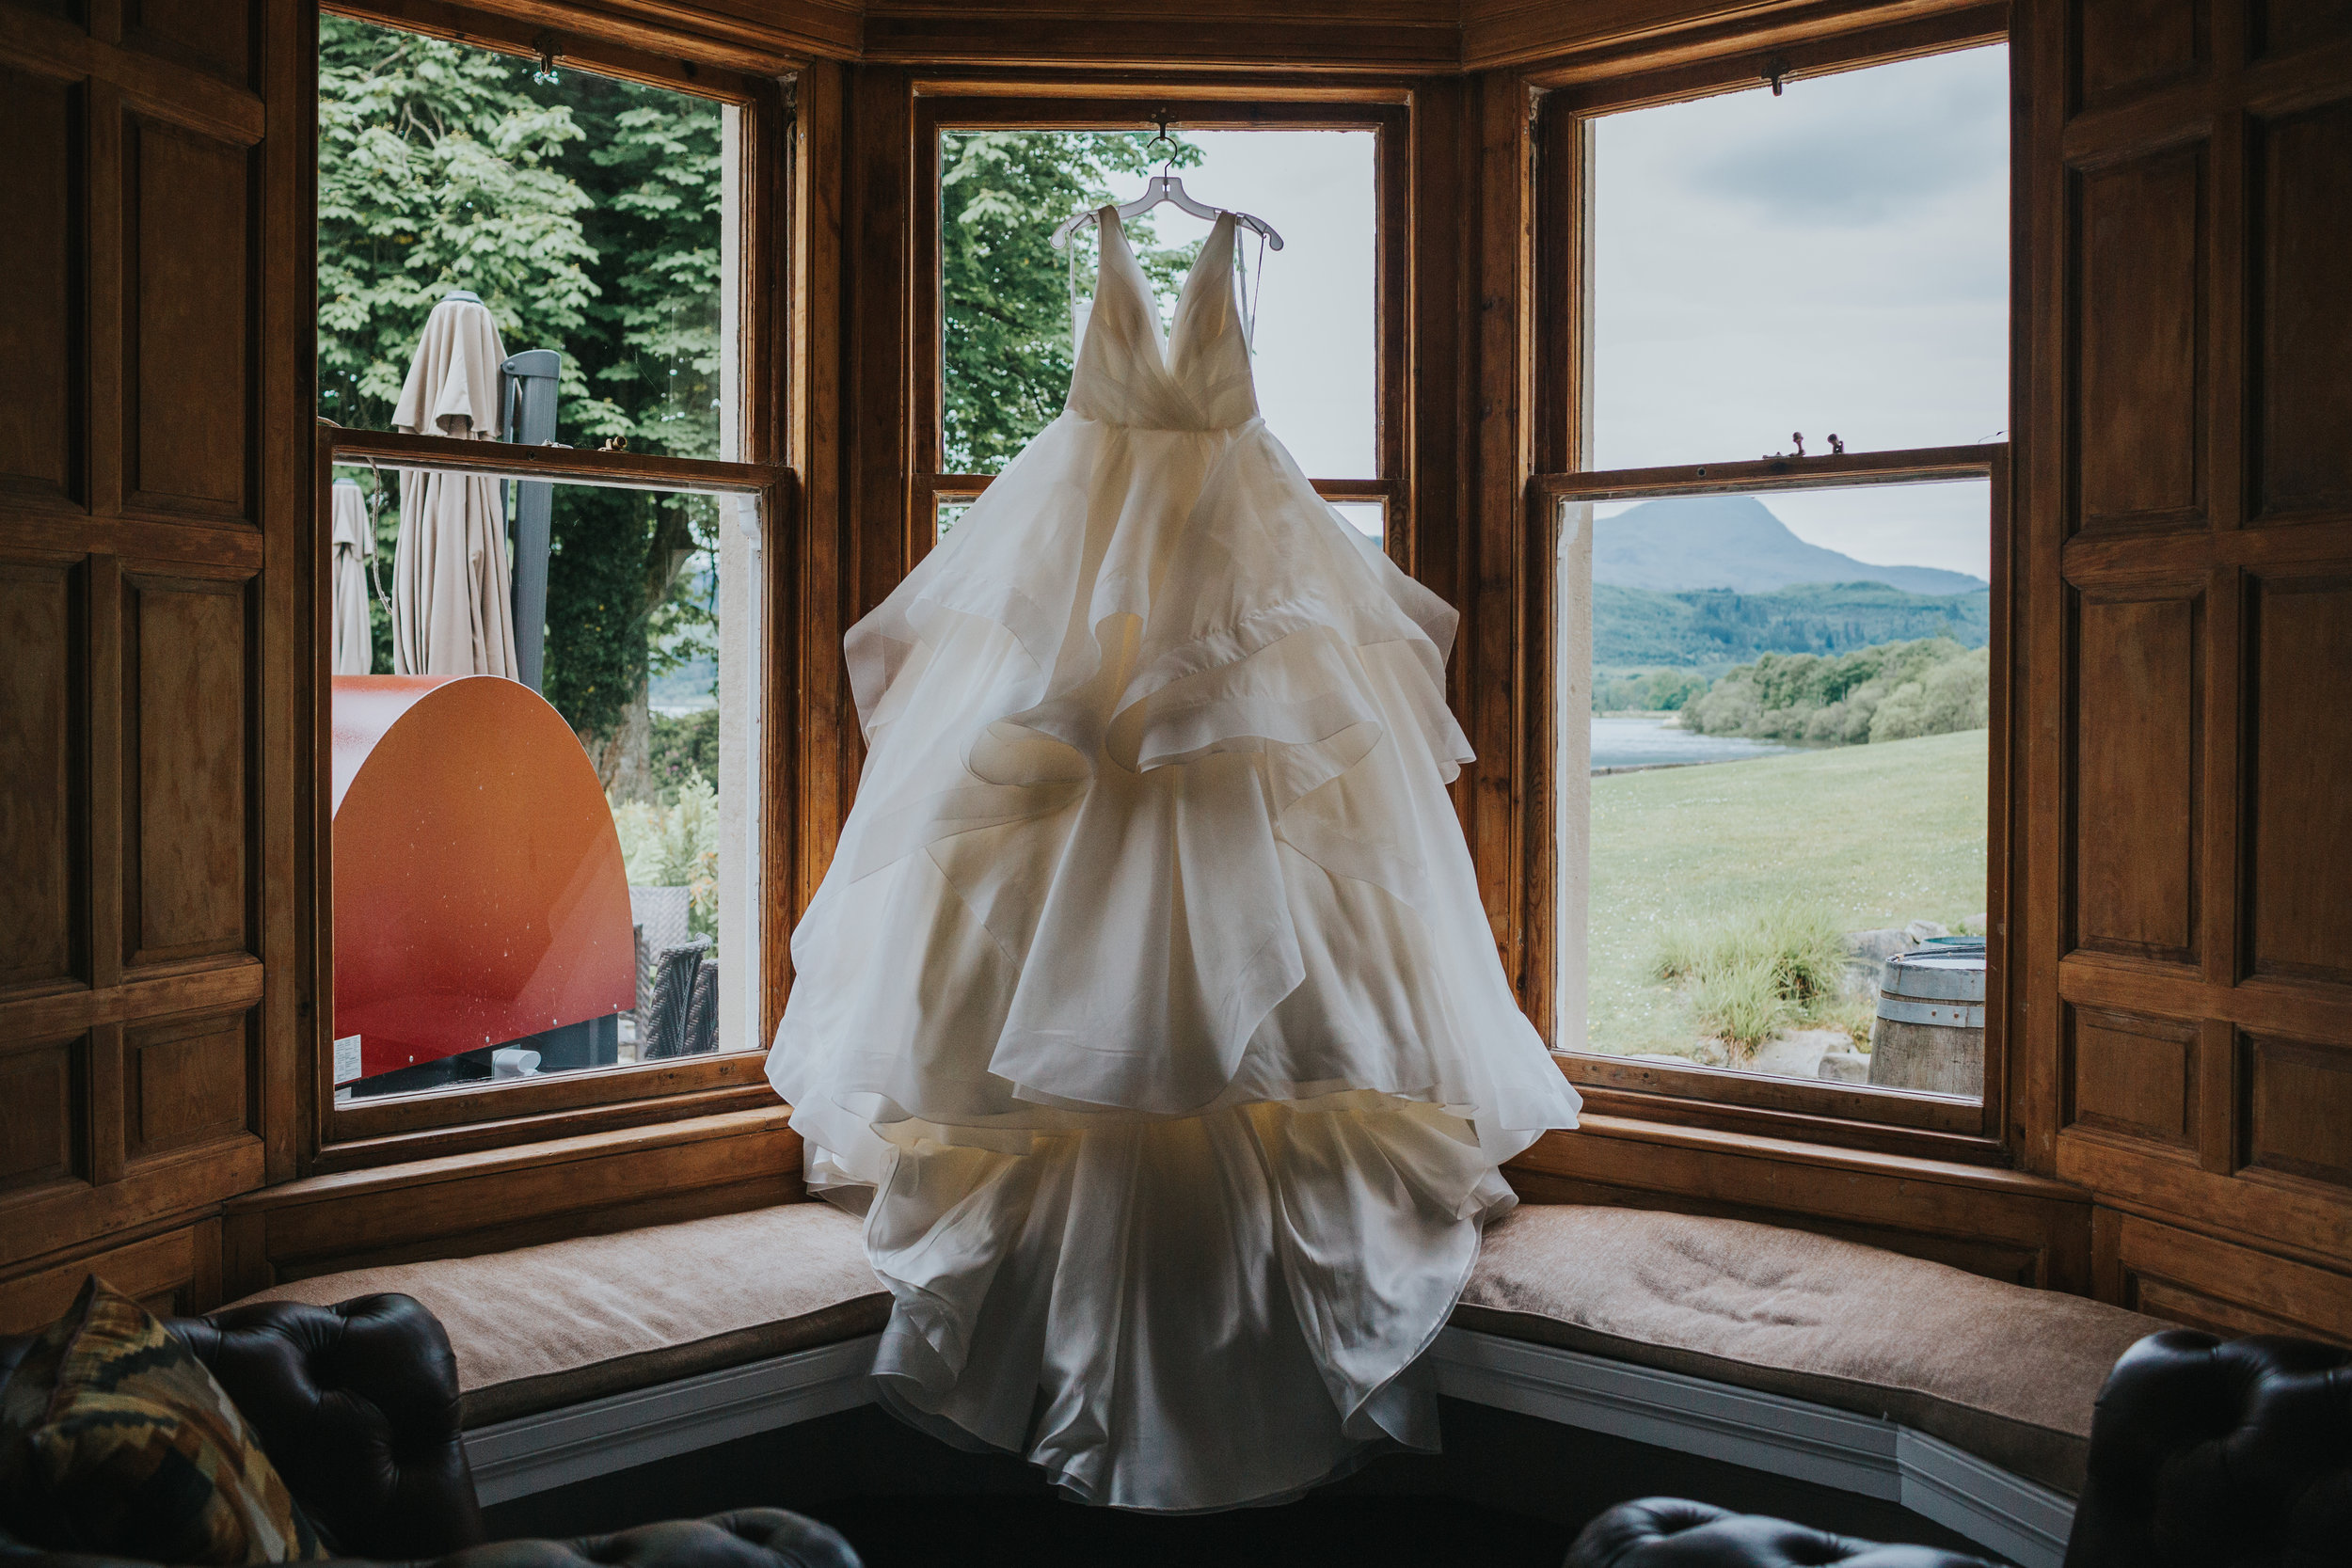 Dress hanging in window at Altskeith Country House